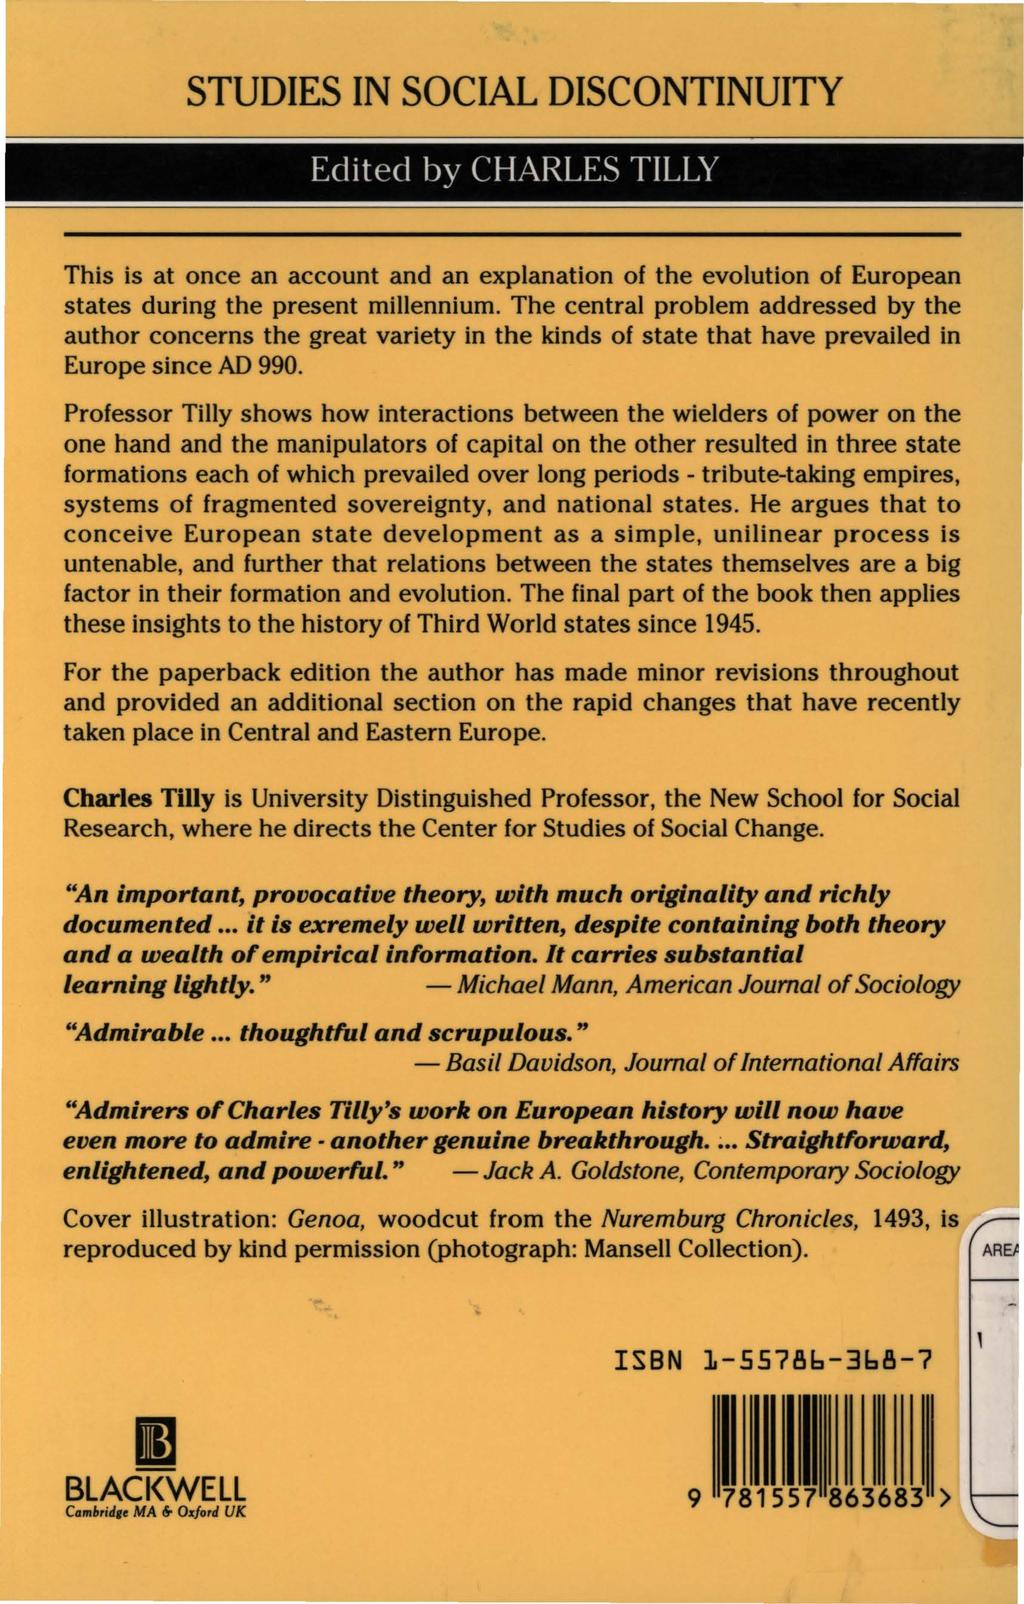 STUDIES IN SOCIAL DISCONTINUITY Edited by CHARLES TILLY This is at once an account and an explanation of the evolution of European states during the present millennium.